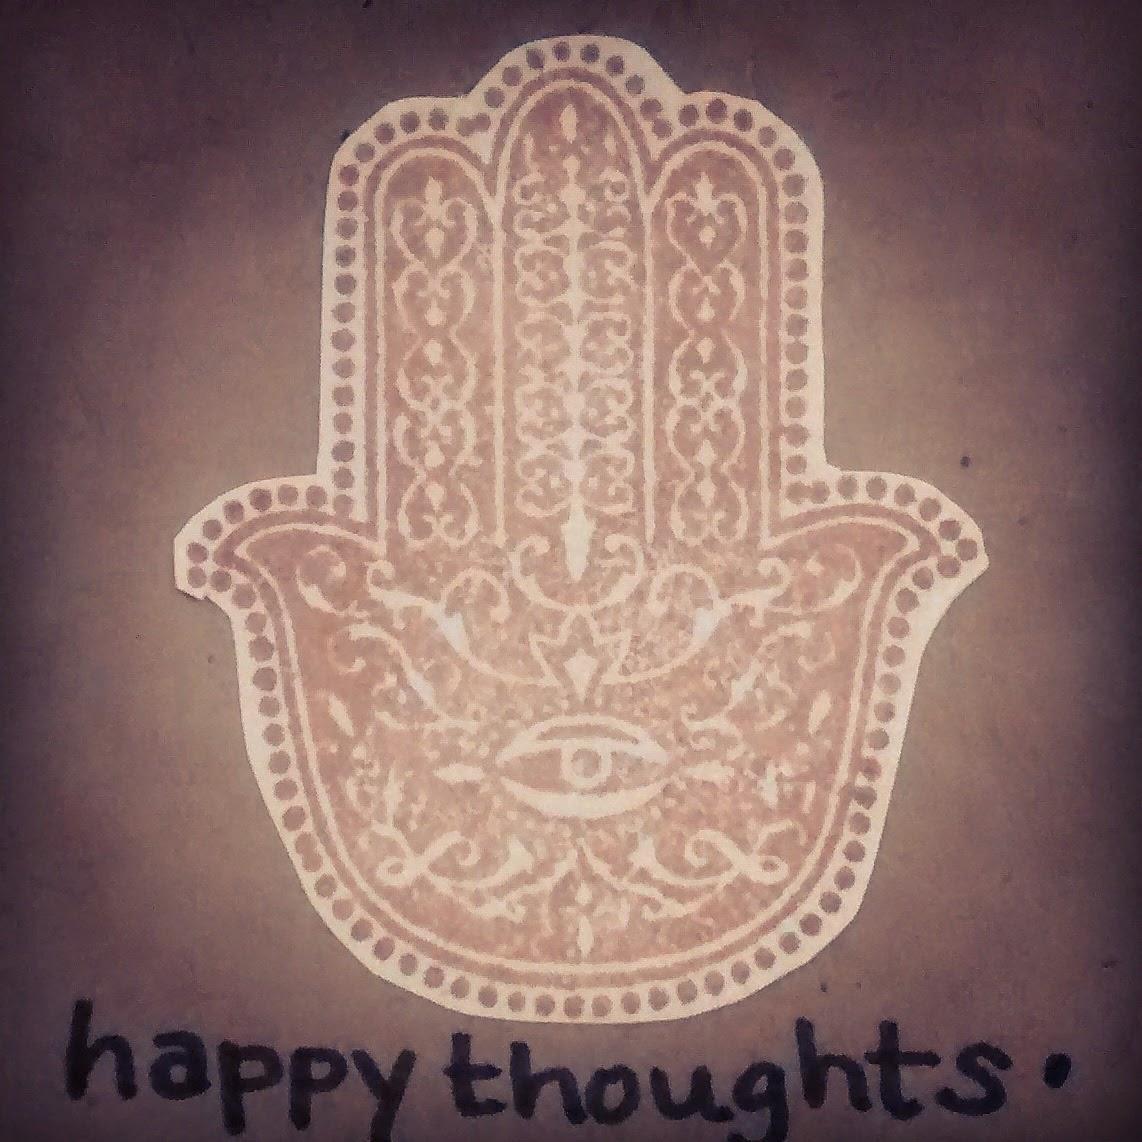 may all the thoughts you send be happy ones | all greeting cards are lovingly handmade by Toronto based artist | custom options available